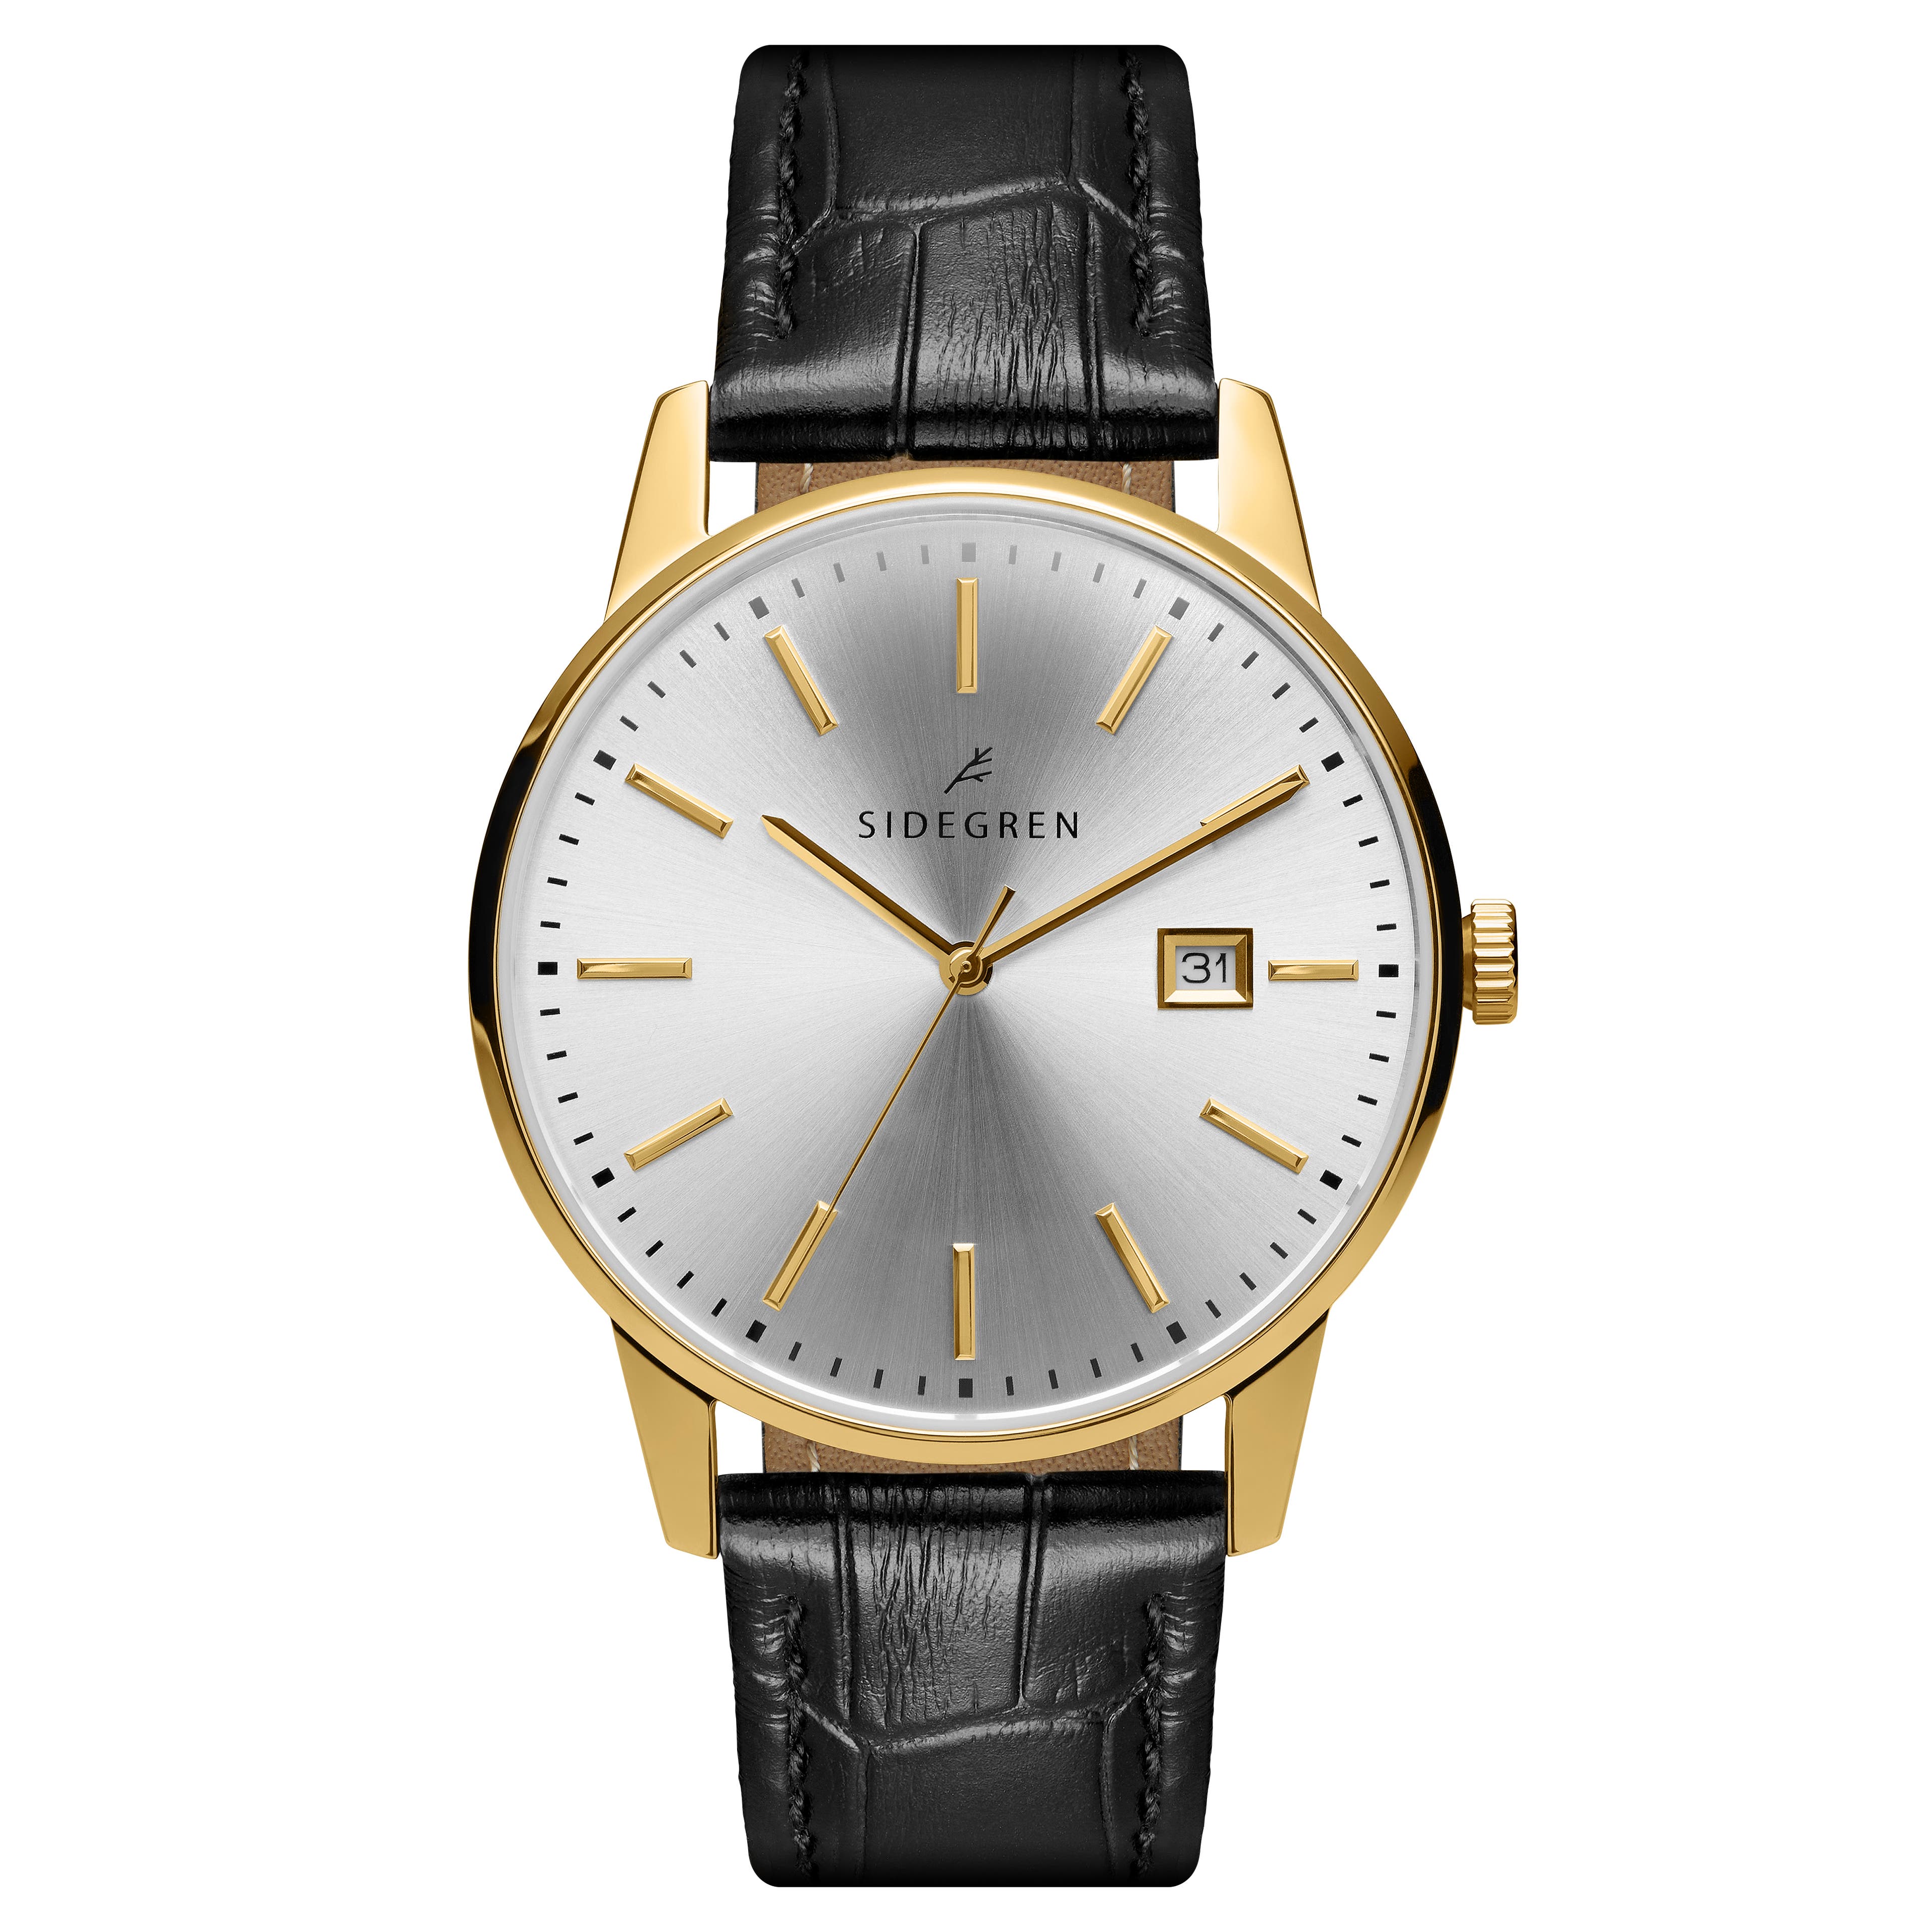 Patriarch | Gold-Tone Dress Watch With Steel Dial & Black Leather Strap